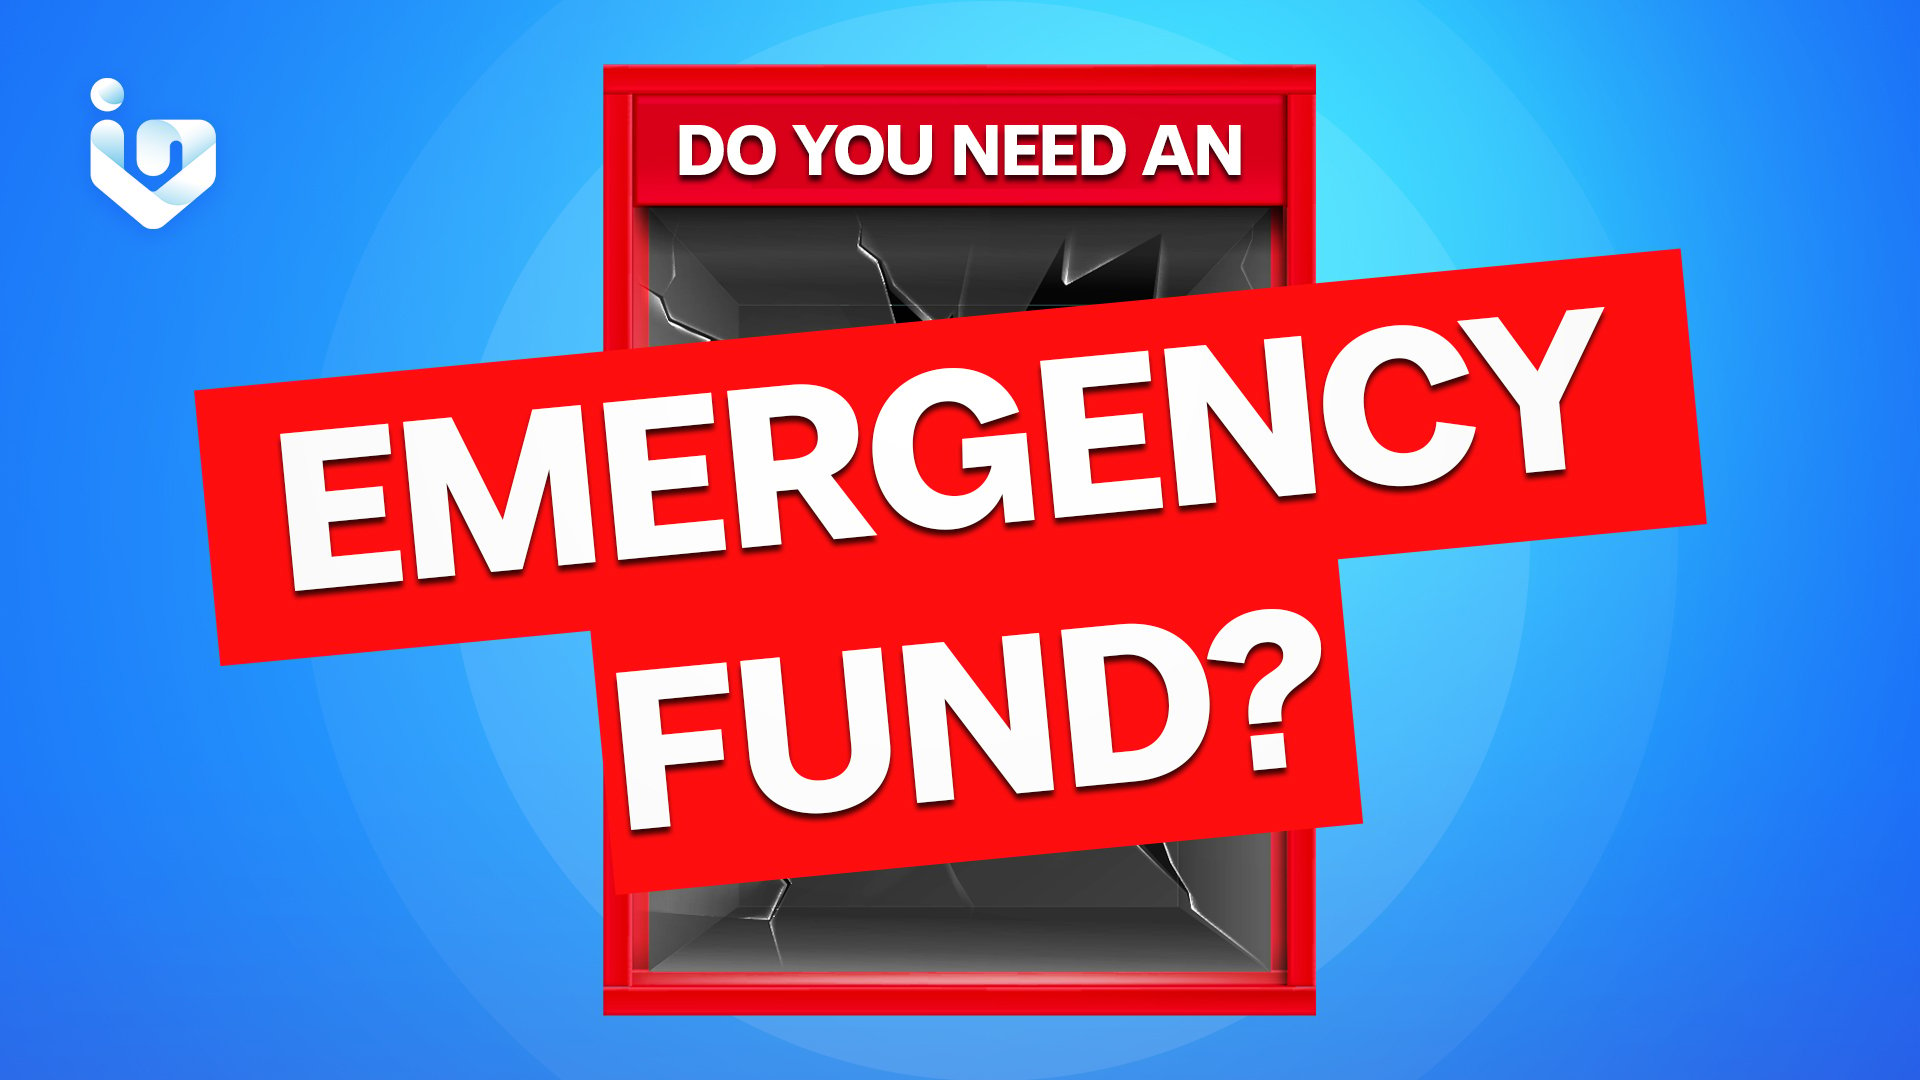 Do You Need an Emergency Fund?